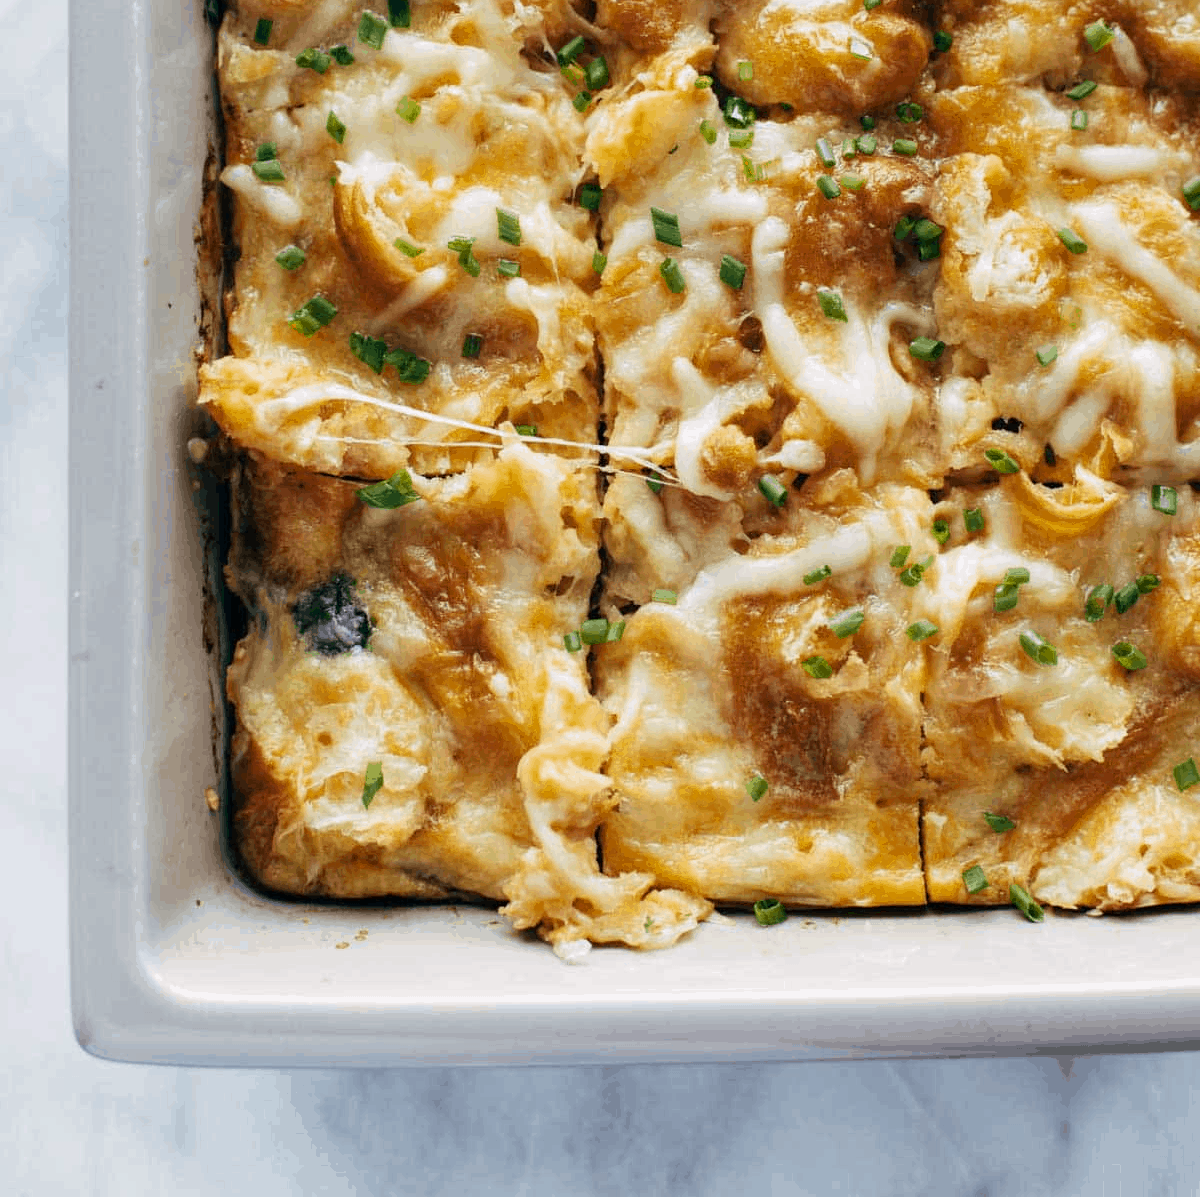 Baked cheesy brunch dish in a tray.